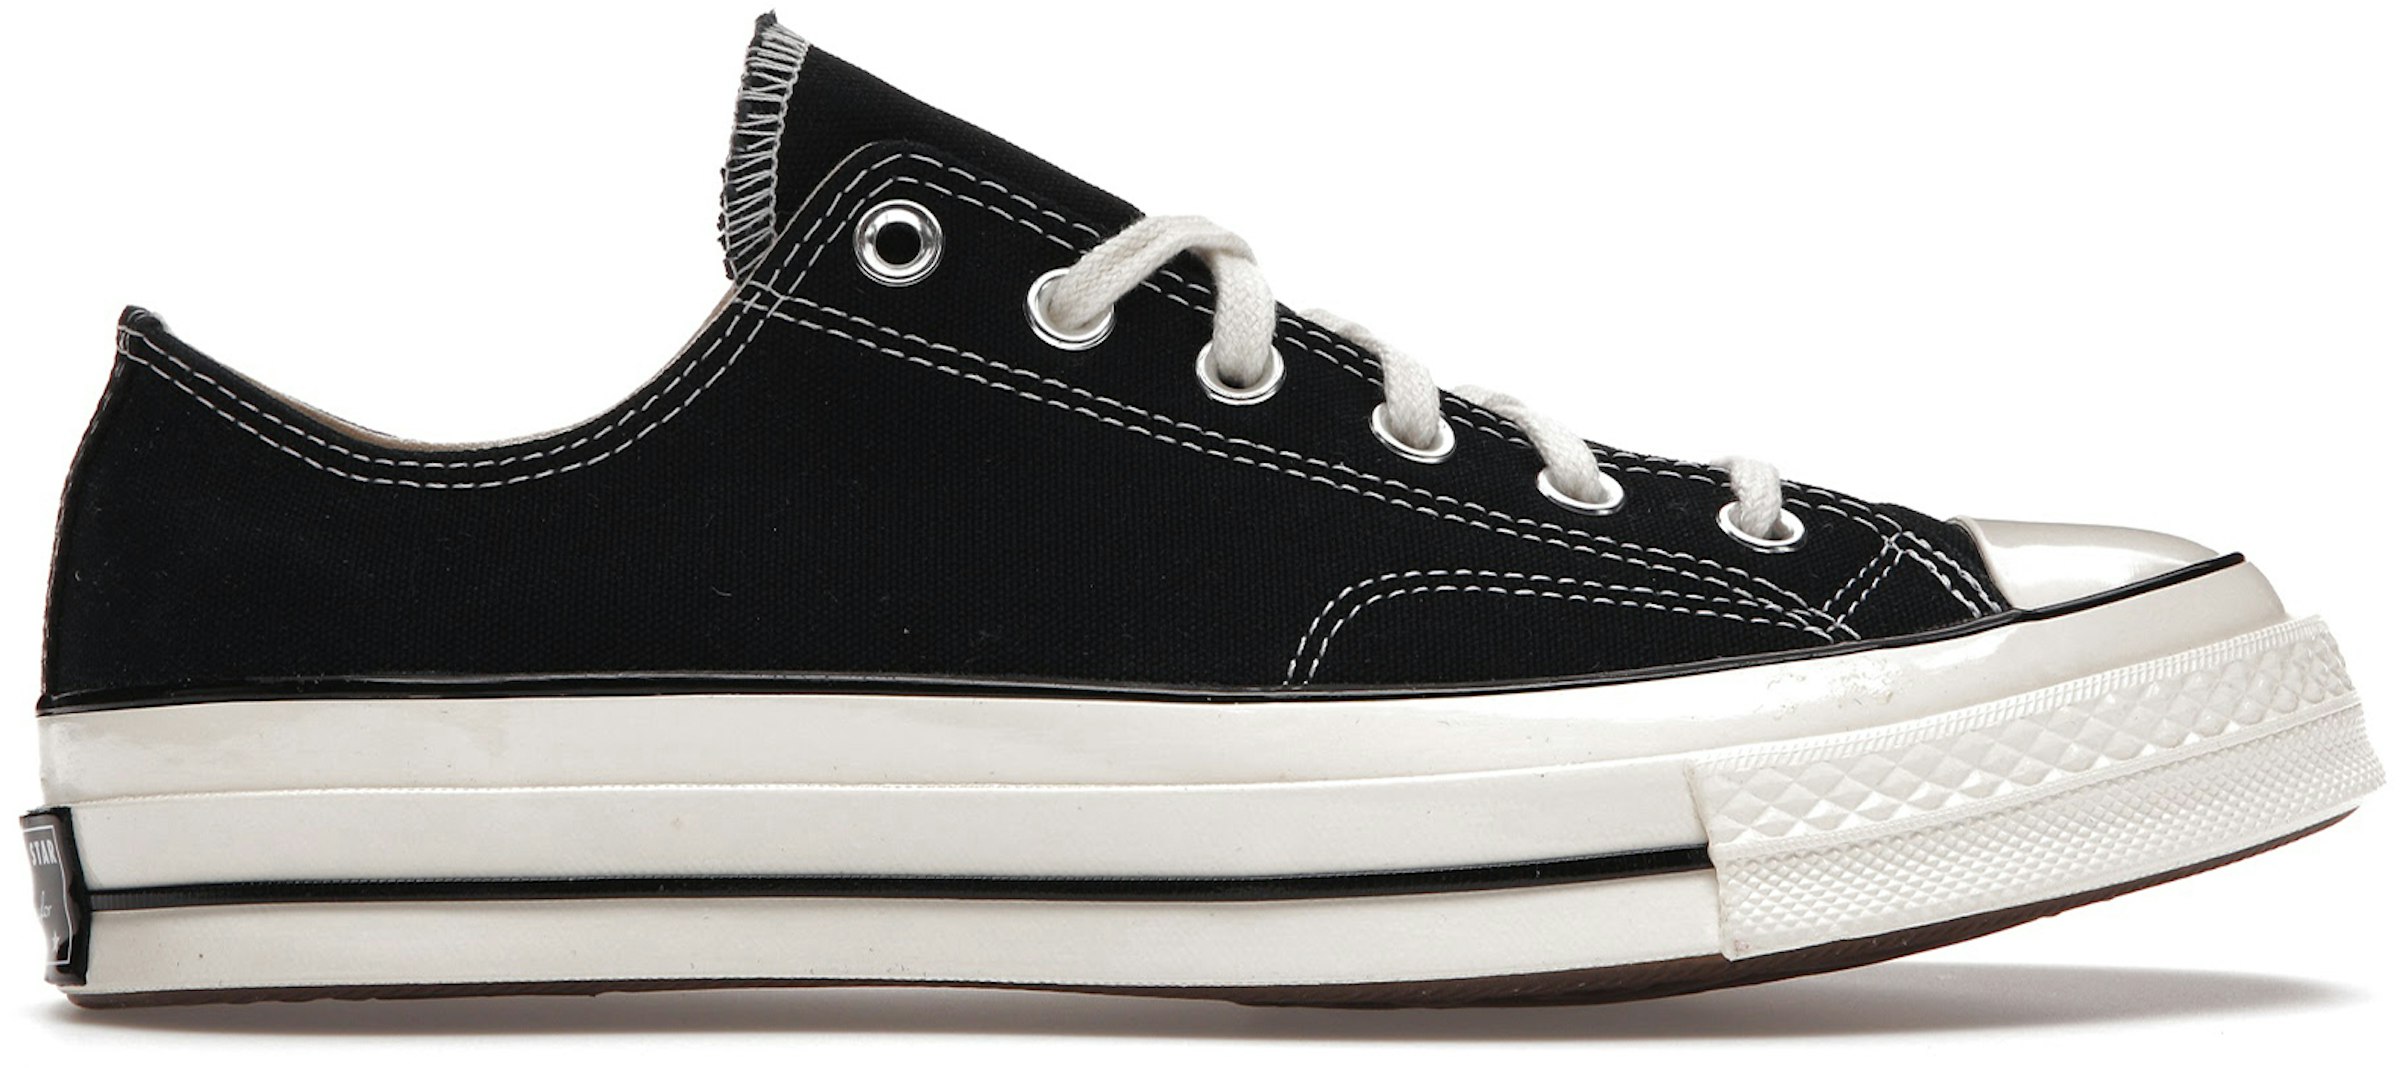 Converse Taylor All-Star 70 Ox Black White - 162058C - US